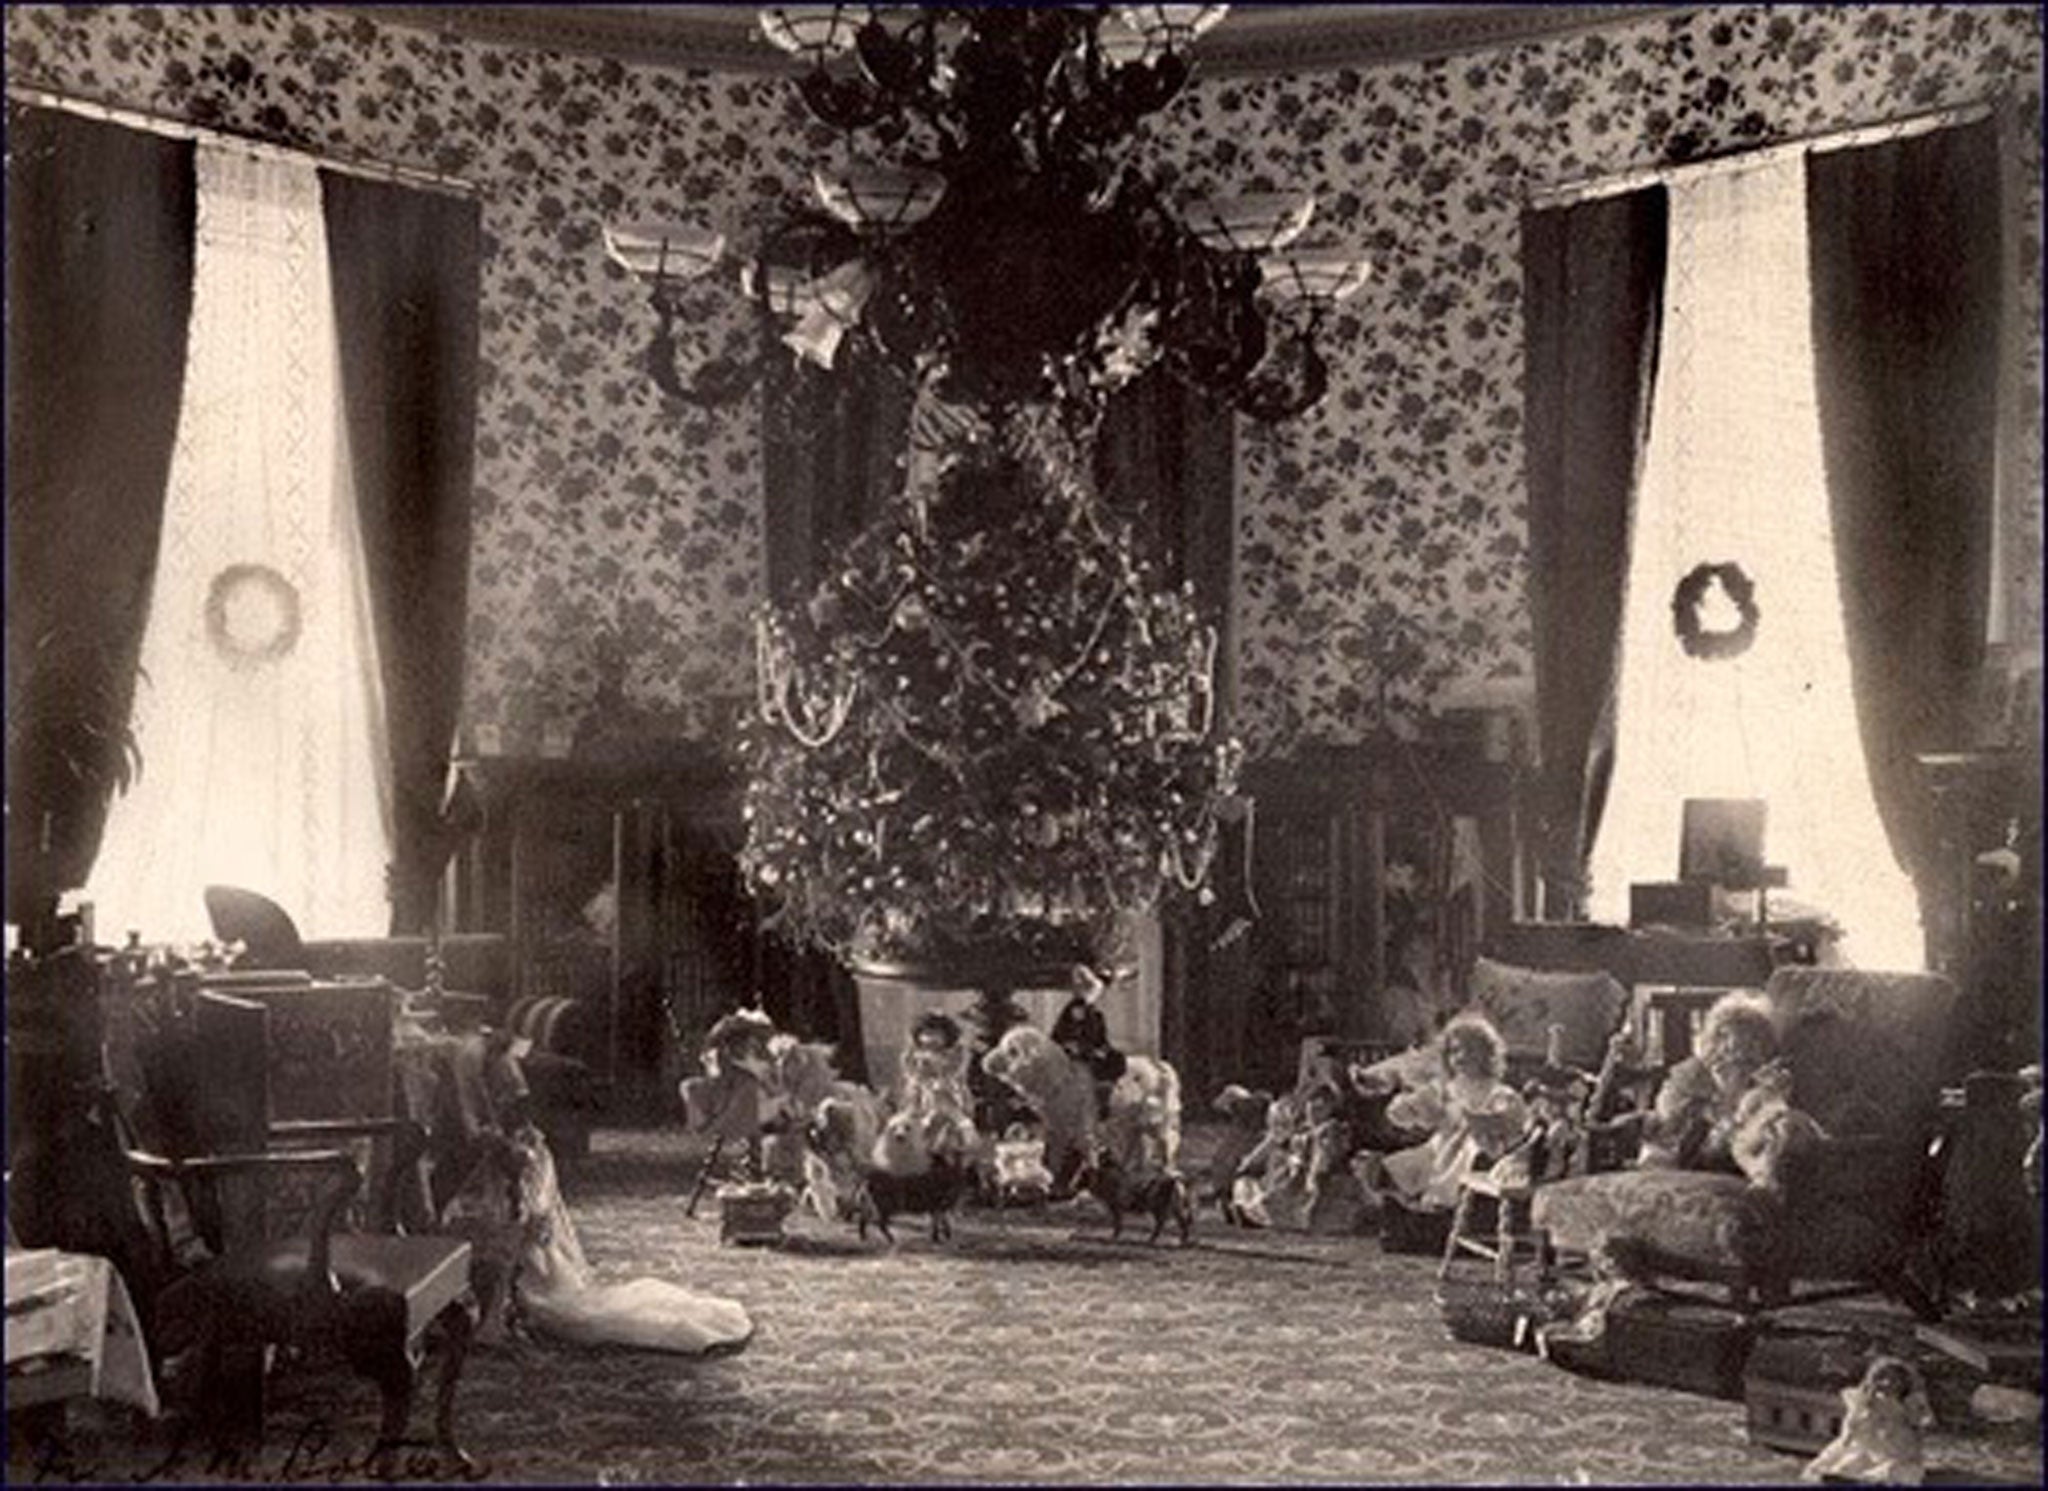 The Grover Cleveland family Christmas tree in 1894